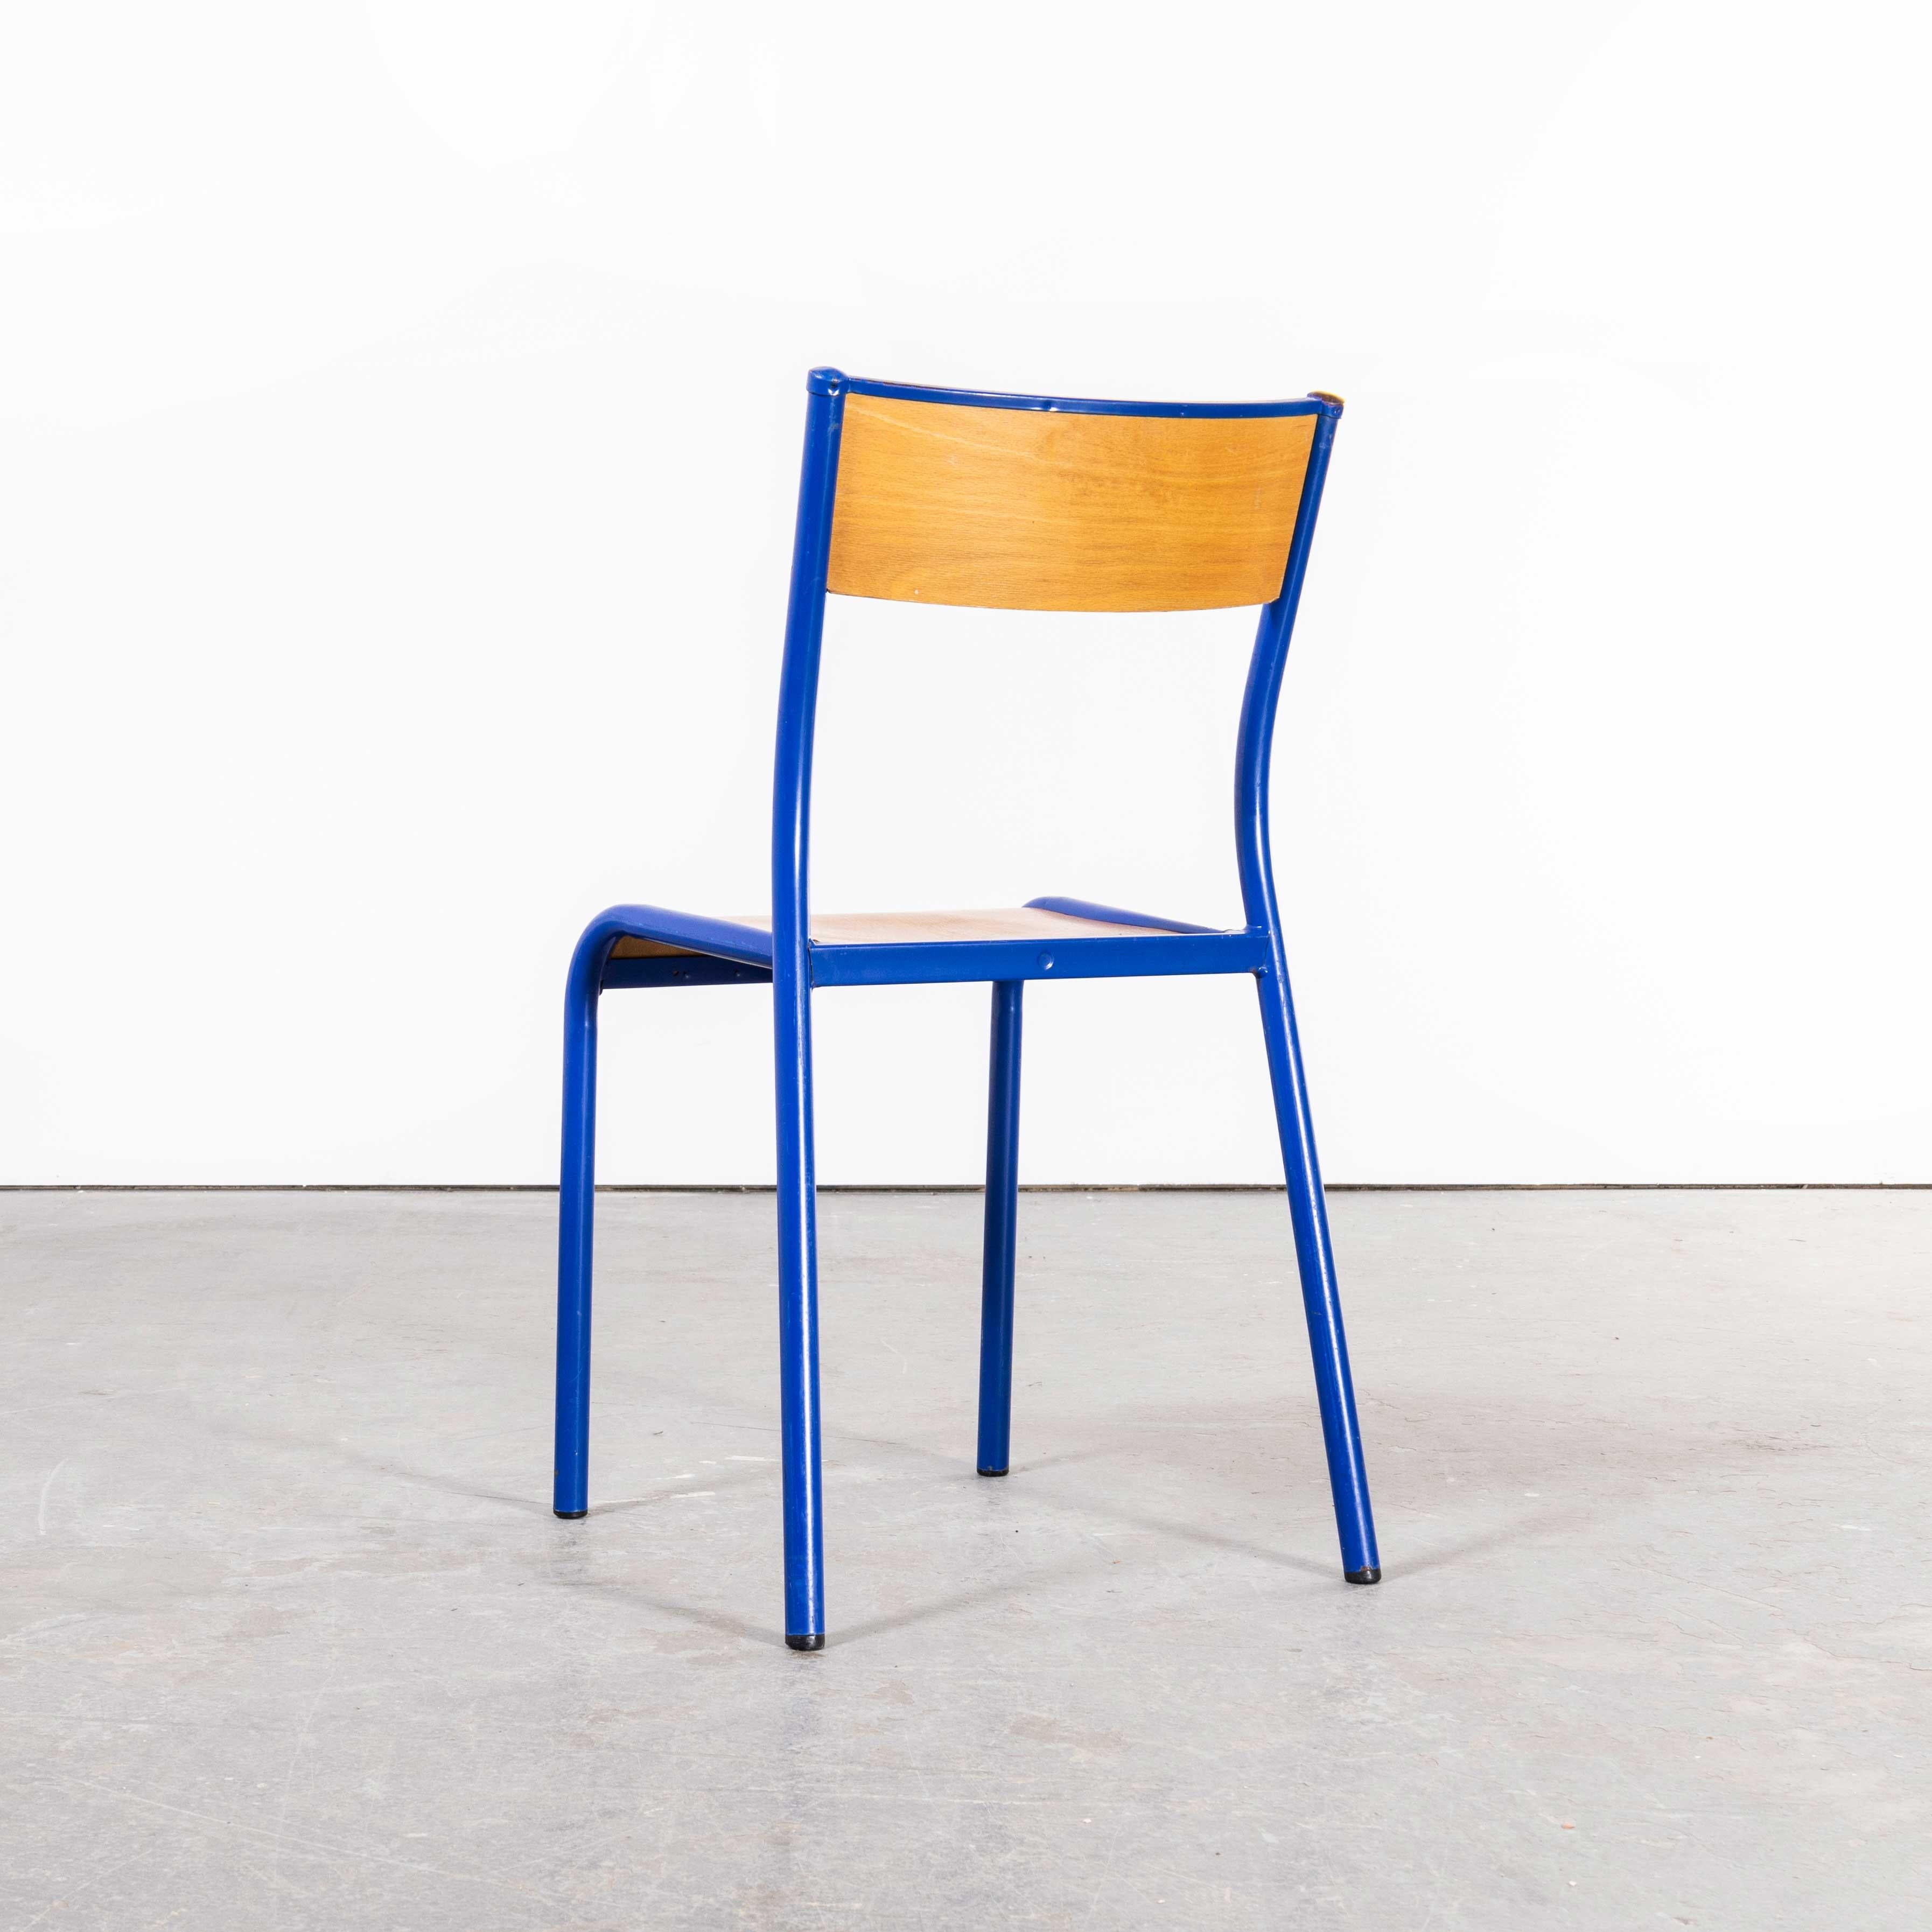 1970s Bright Blue Mullca stacking dining chair – beech seat – set of six
1970s Bright Blue Mullca stacking dining chair – beech seat – set of six. One of our most favourite chairs, in 1947 Robert Muller and Gaston Cavaillon created the company that